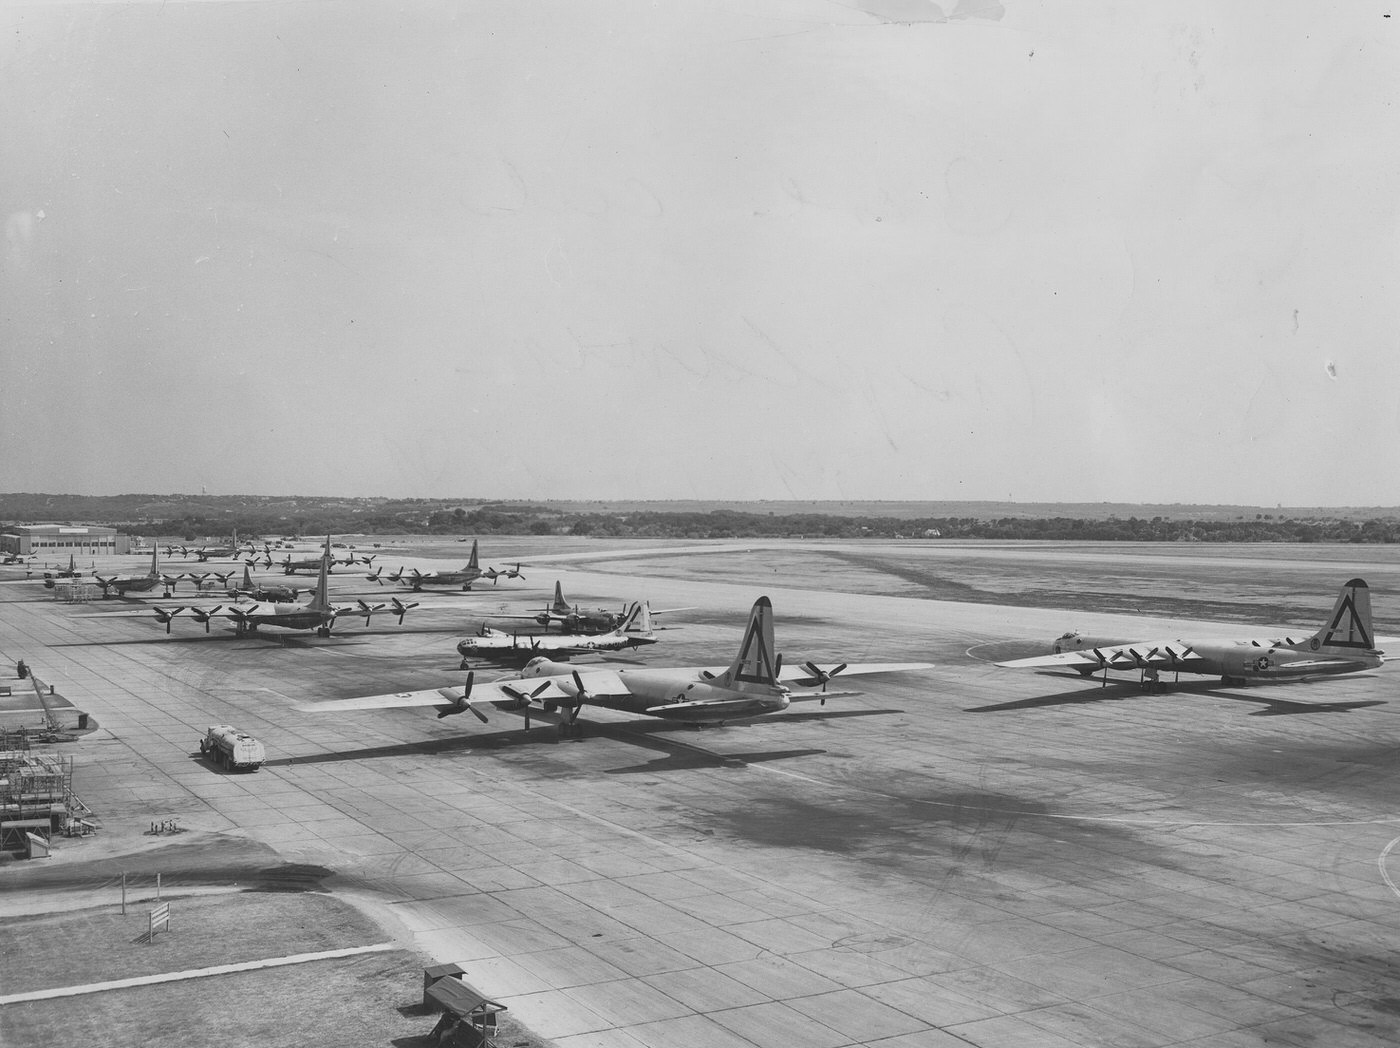 8th Air Force fleet of B-36 bombers parked on tarmac, Carswell Air Force Base, 1948